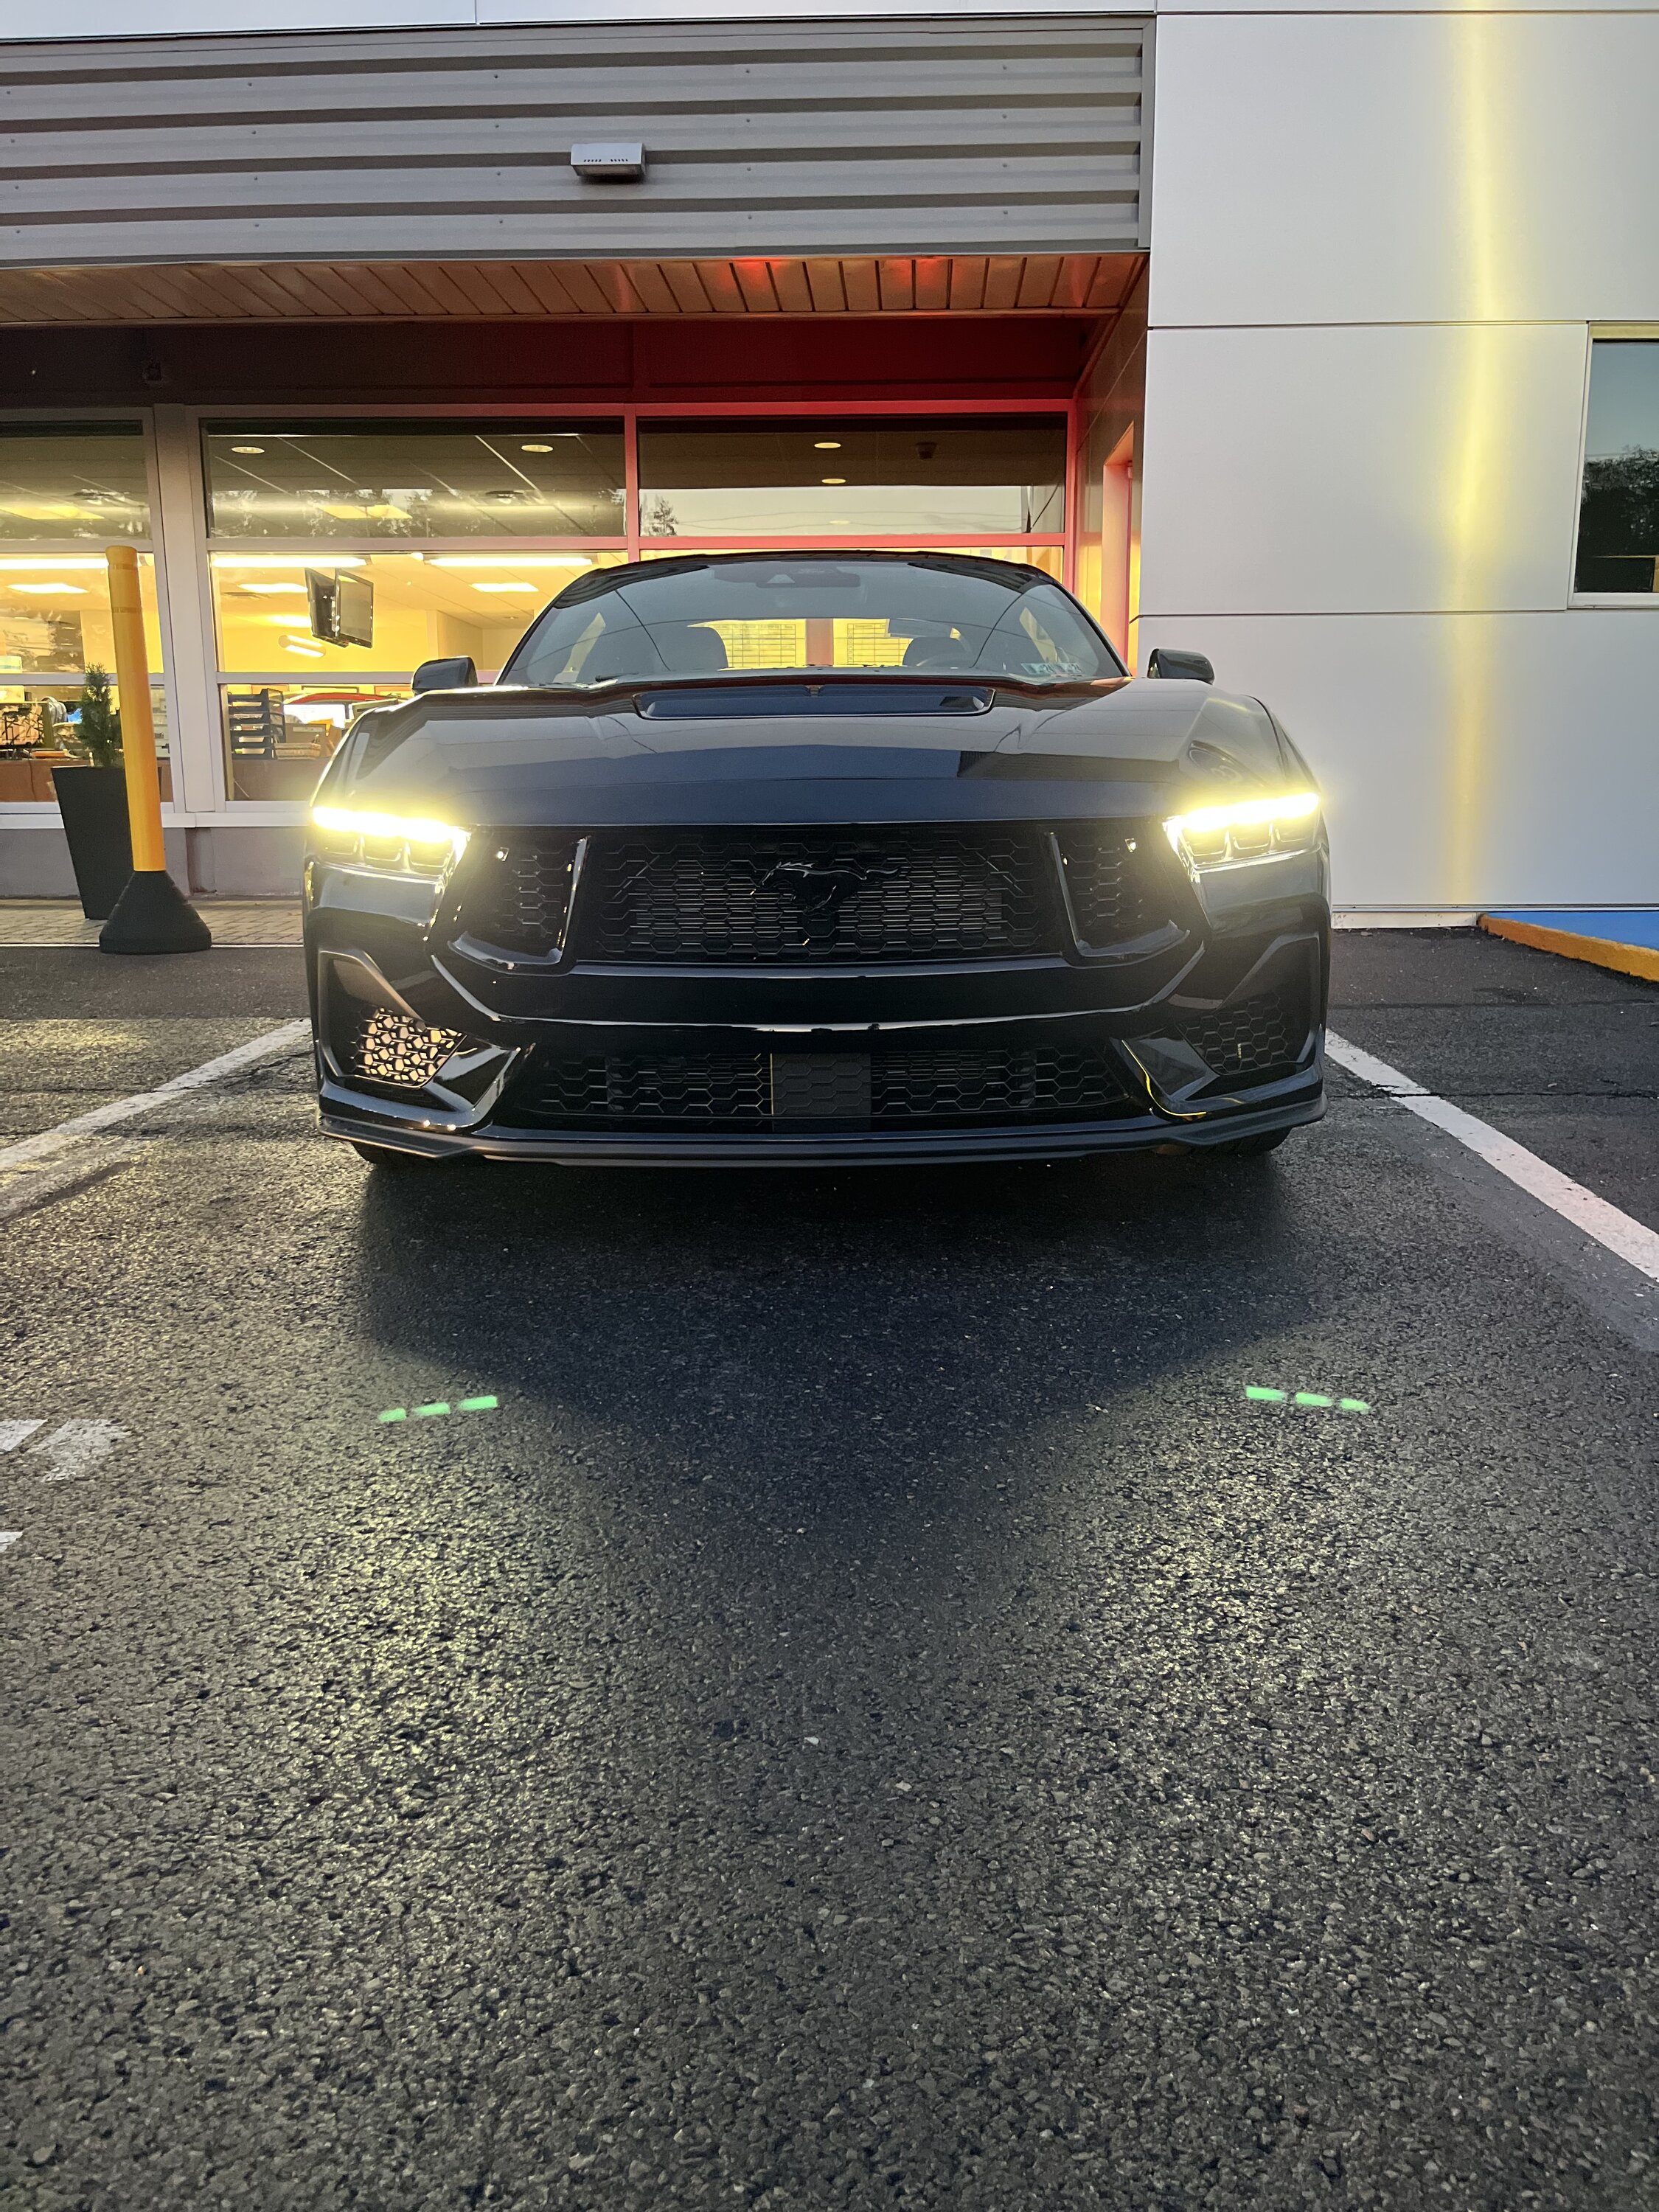 S650 Mustang Official SHADOW BLACK Mustang S650 Thread 71616799616__59A0B7A8-2A87-4784-8B7D-88789BF89367